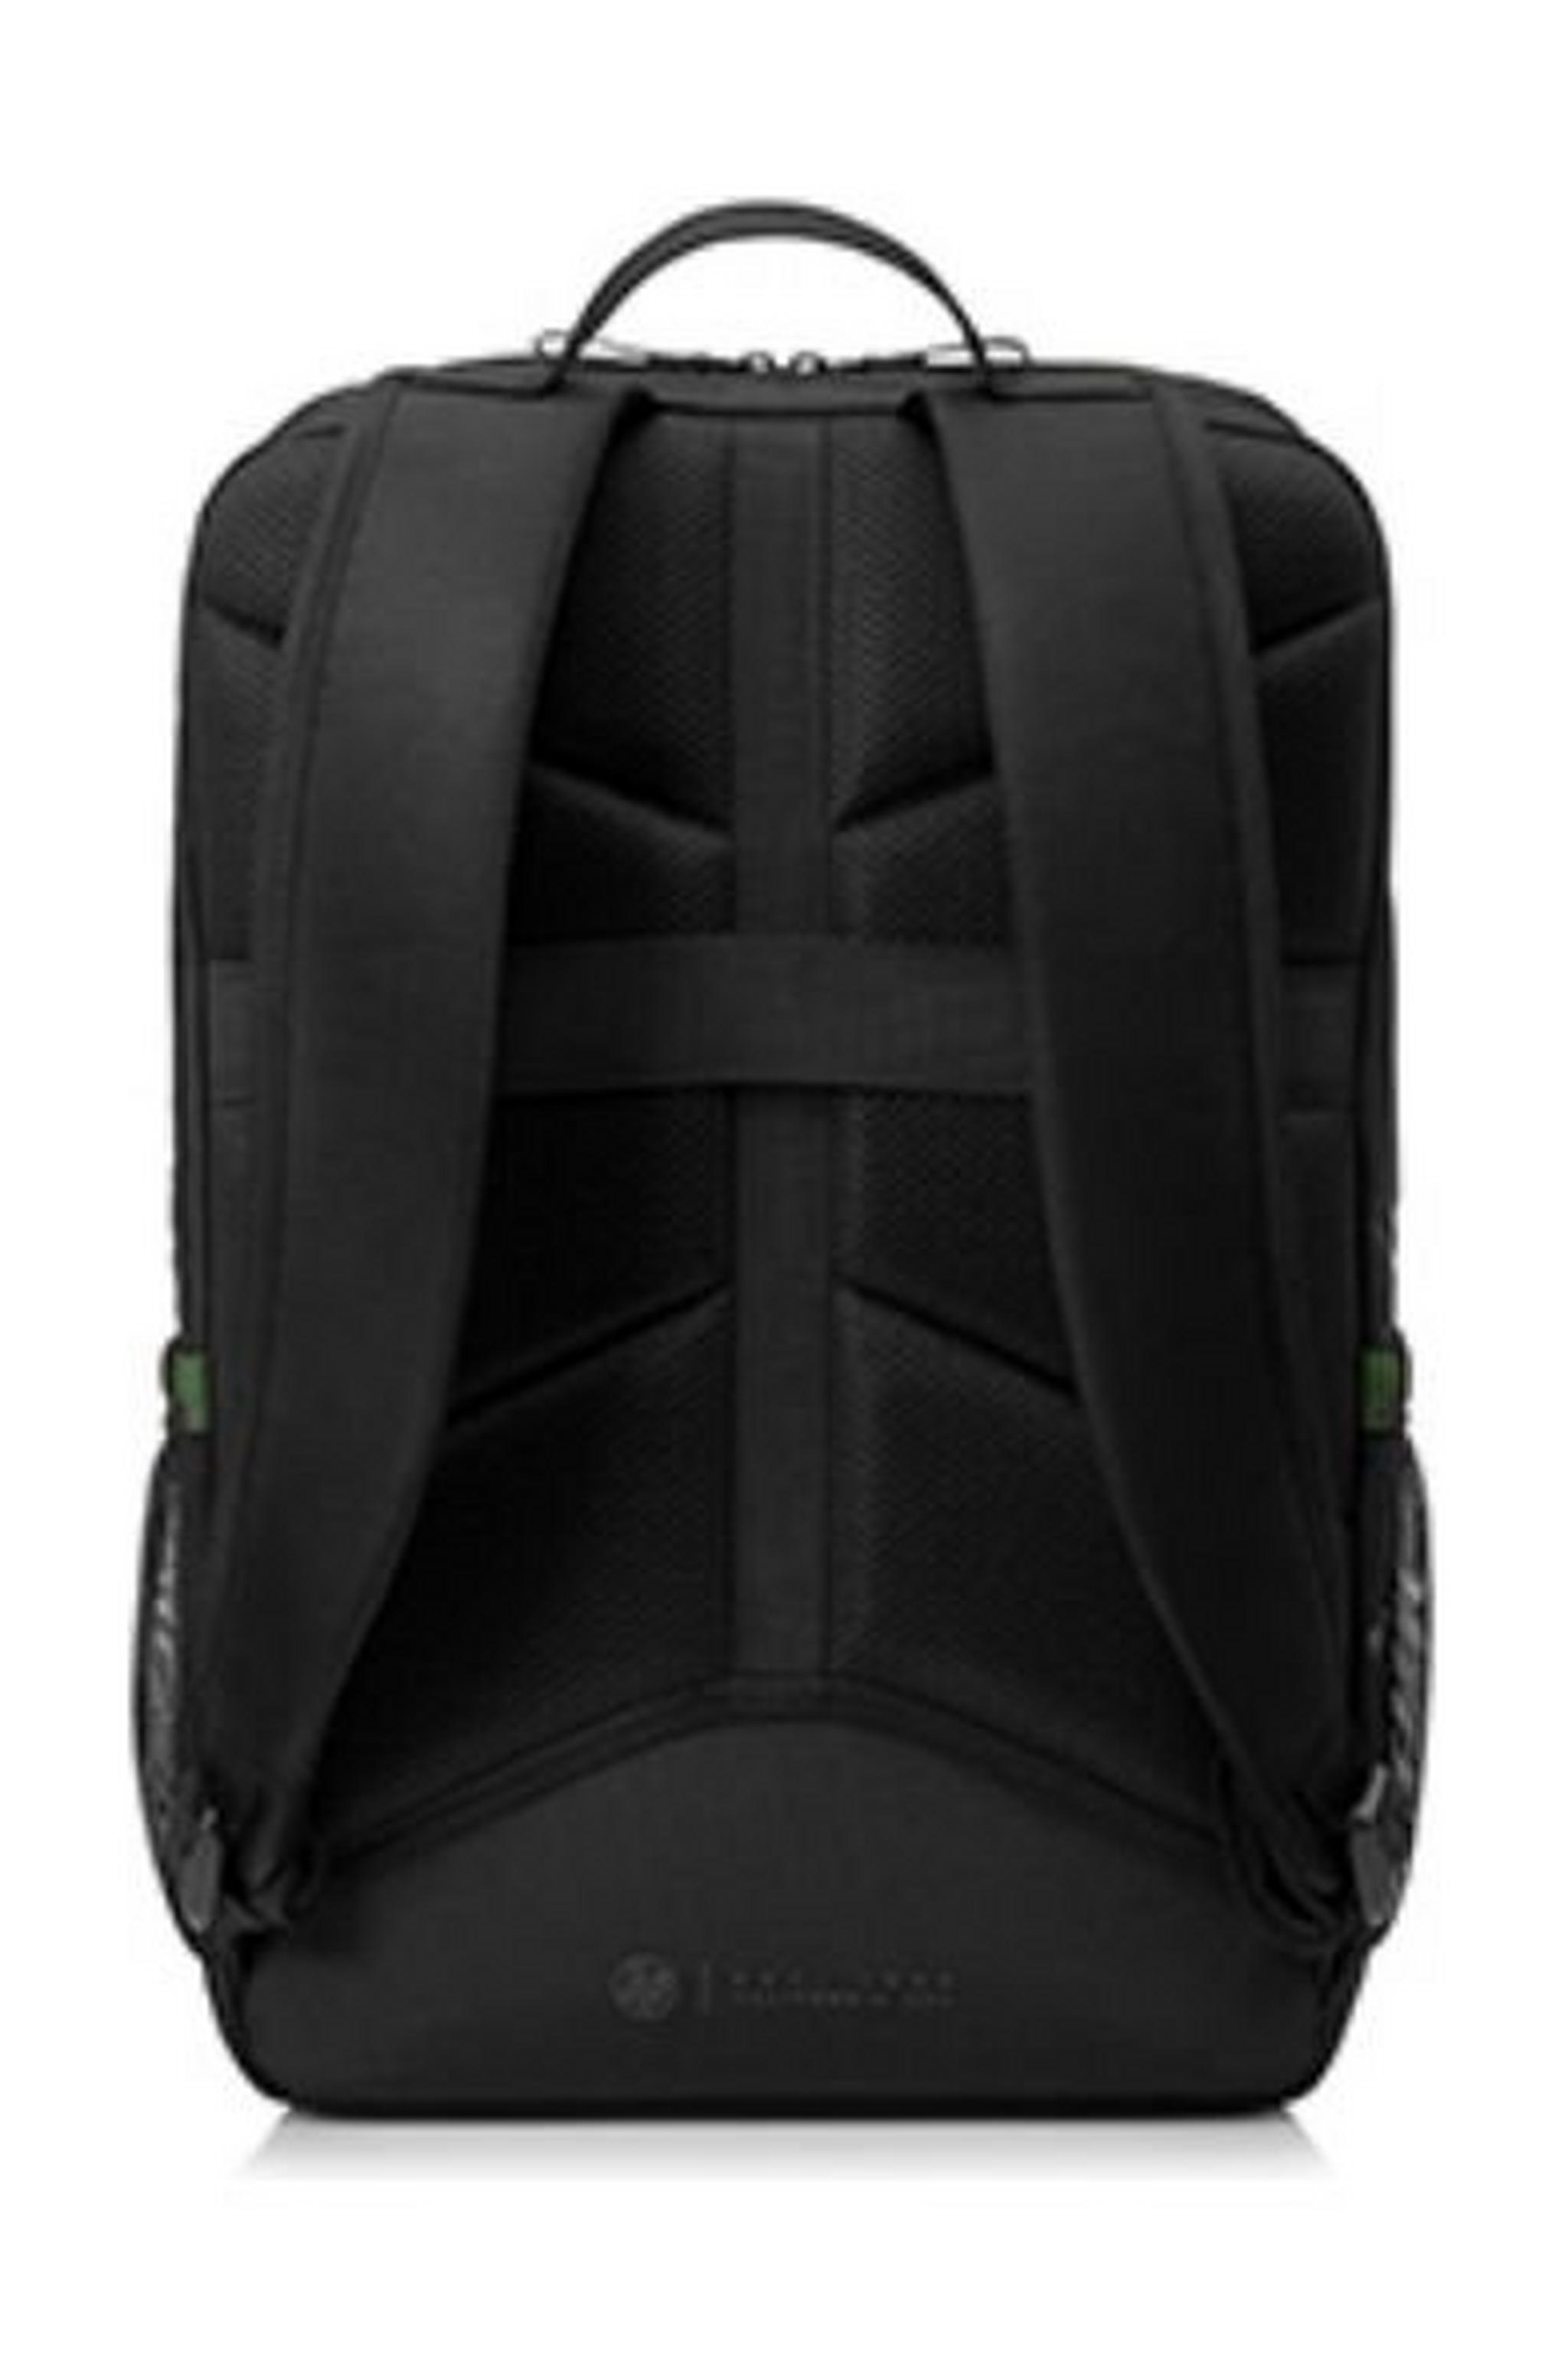 HP Pavilion Gaming Backpack 400 for up to 15-inch Laptop